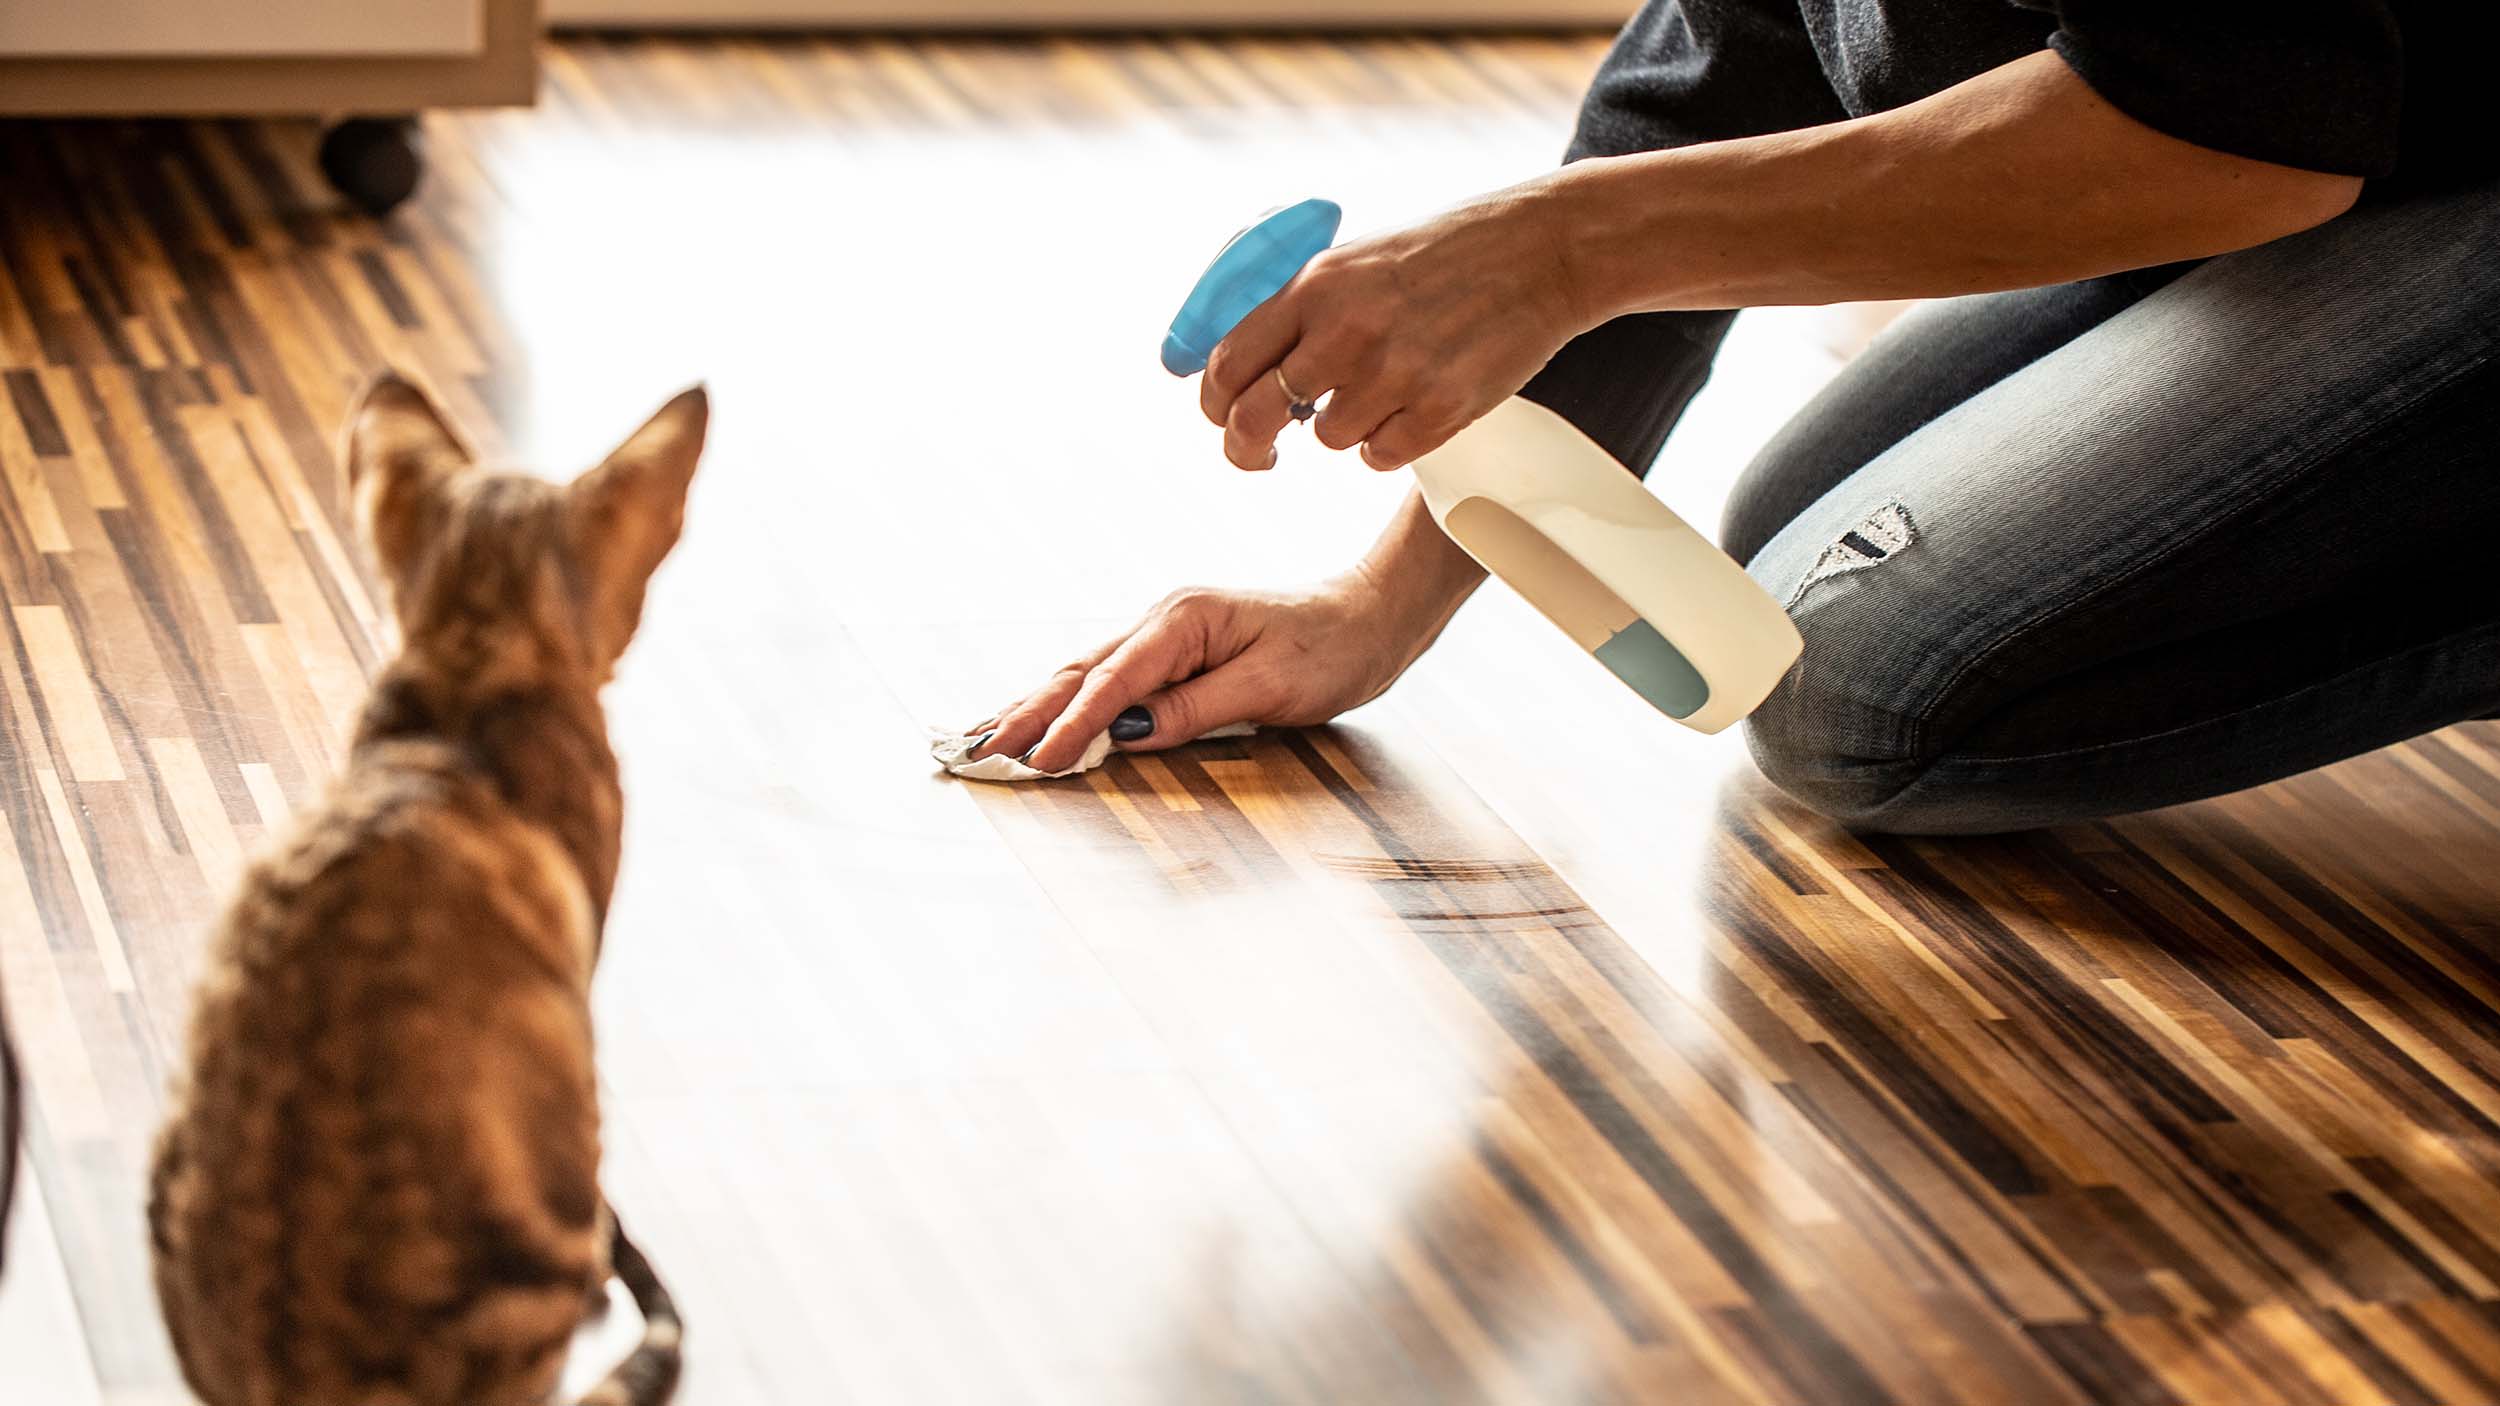 36 Best Pet-Safe Cleaning Products for Pet Messes 2021